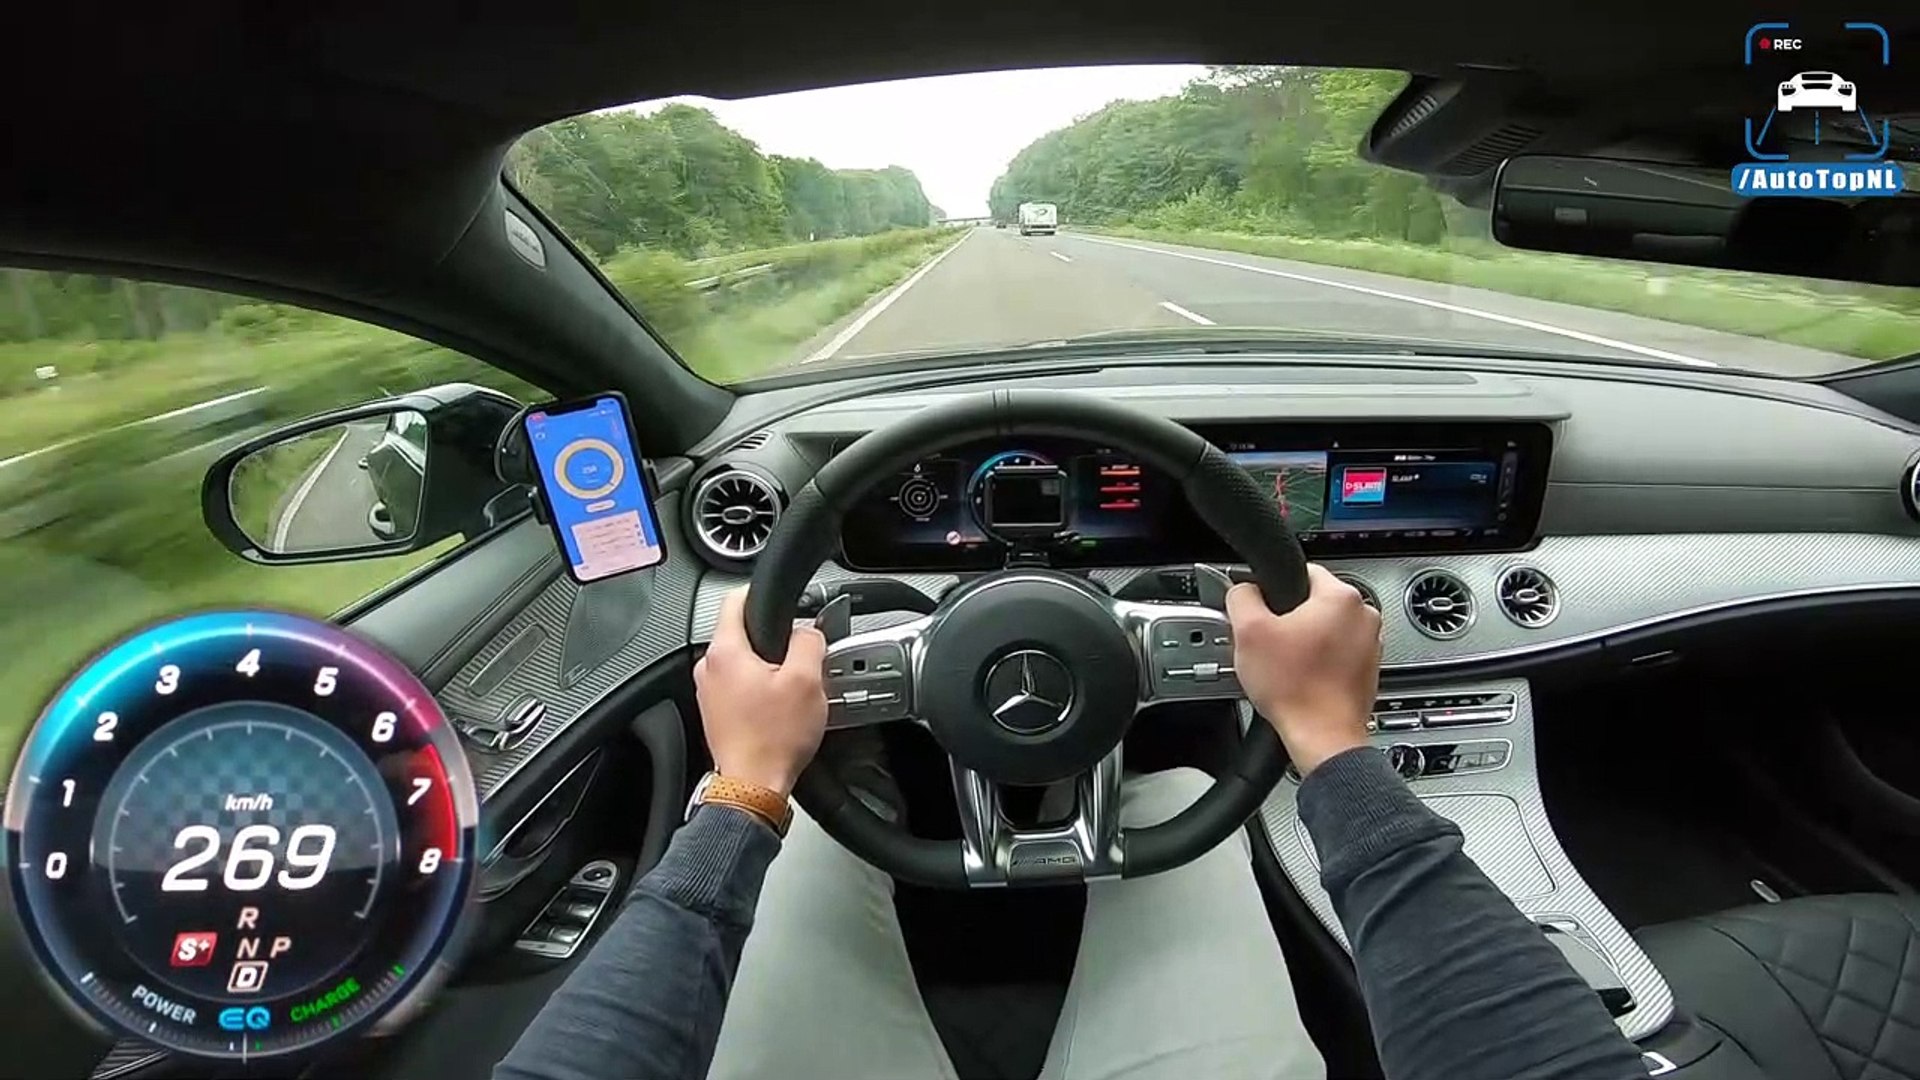 Mercedes-AMG CLS 53 4MATIC+ AUTOBAHN POV 276km/h TOP SPEED by AutoTopNL